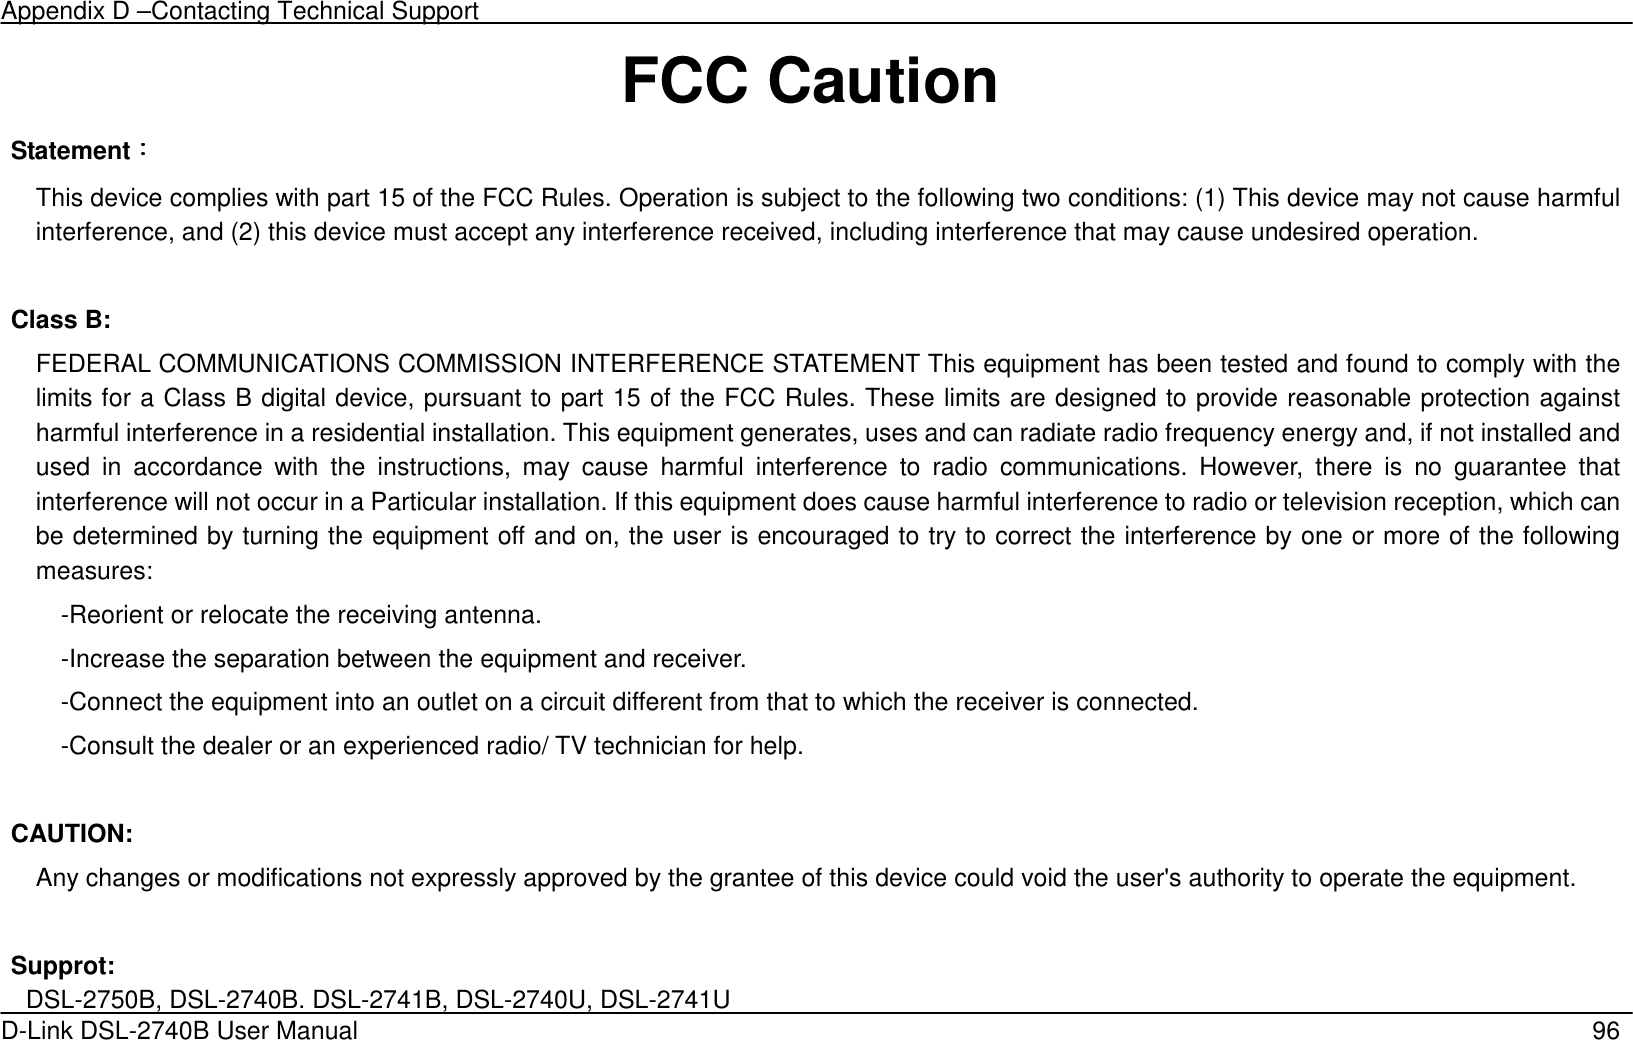 Appendix D –Contacting Technical Support   D-Link DSL-2740B User Manual                                                  96 FCC Caution Statement：：：： This device complies with part 15 of the FCC Rules. Operation is subject to the following two conditions: (1) This device may not cause harmful interference, and (2) this device must accept any interference received, including interference that may cause undesired operation.  Class B: FEDERAL COMMUNICATIONS COMMISSION INTERFERENCE STATEMENT This equipment has been tested and found to comply with the limits for a Class B digital device, pursuant to part 15 of the FCC Rules. These limits are designed to provide reasonable protection against harmful interference in a residential installation. This equipment generates, uses and can radiate radio frequency energy and, if not installed and used  in  accordance  with  the  instructions,  may  cause  harmful  interference  to  radio  communications.  However,  there  is  no  guarantee  that interference will not occur in a Particular installation. If this equipment does cause harmful interference to radio or television reception, which can be determined by turning the equipment off and on, the user is encouraged to try to correct the interference by one or more of the following measures: -Reorient or relocate the receiving antenna. -Increase the separation between the equipment and receiver. -Connect the equipment into an outlet on a circuit different from that to which the receiver is connected. -Consult the dealer or an experienced radio/ TV technician for help.  CAUTION: Any changes or modifications not expressly approved by the grantee of this device could void the user&apos;s authority to operate the equipment.  Supprot:   DSL-2750B, DSL-2740B. DSL-2741B, DSL-2740U, DSL-2741U 